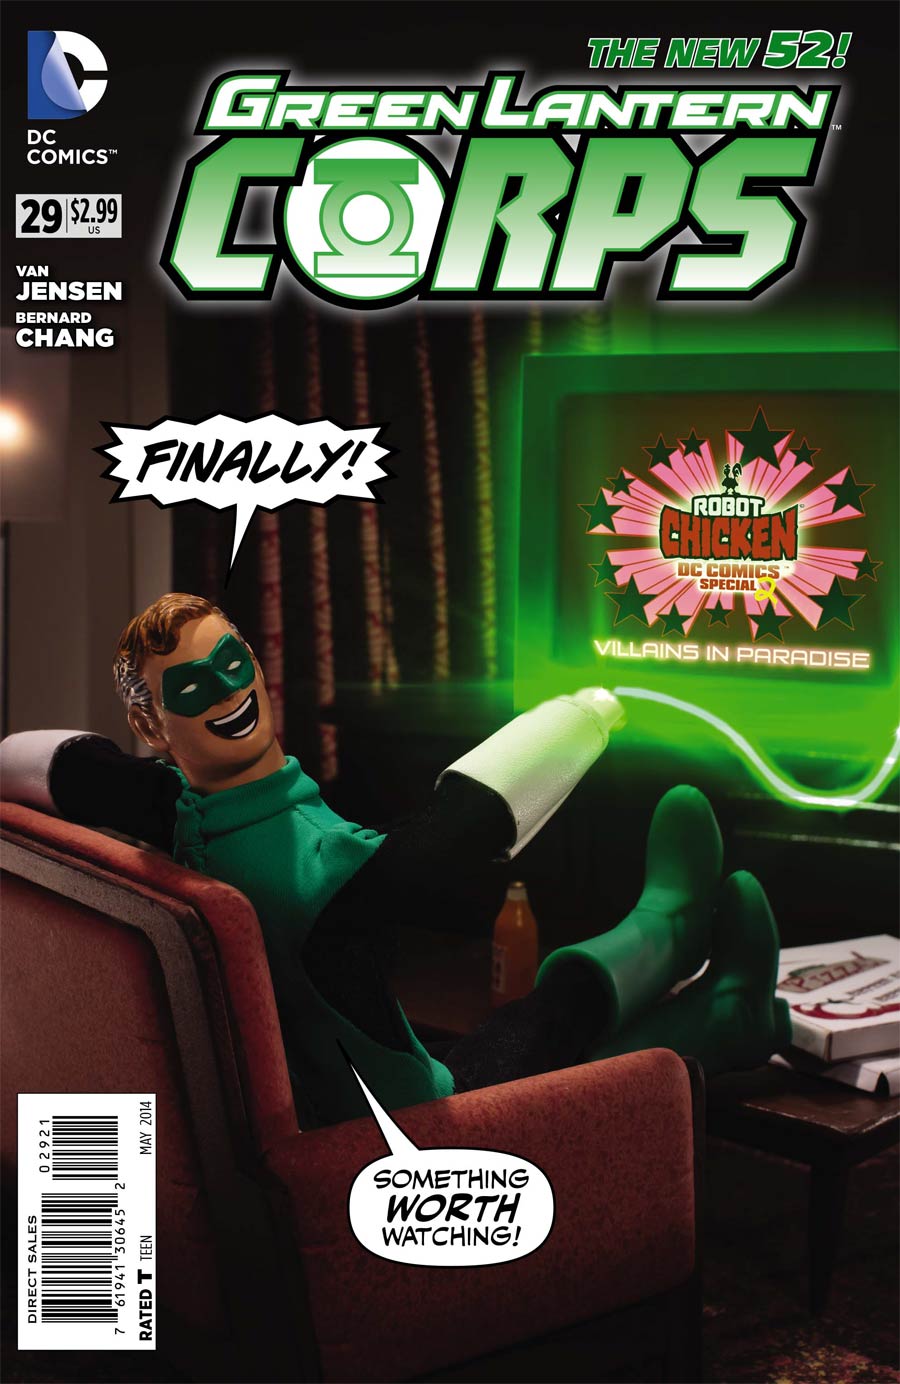 Green Lantern Corps Vol 3 #29 Cover B Incentive Robot Chicken Variant Cover